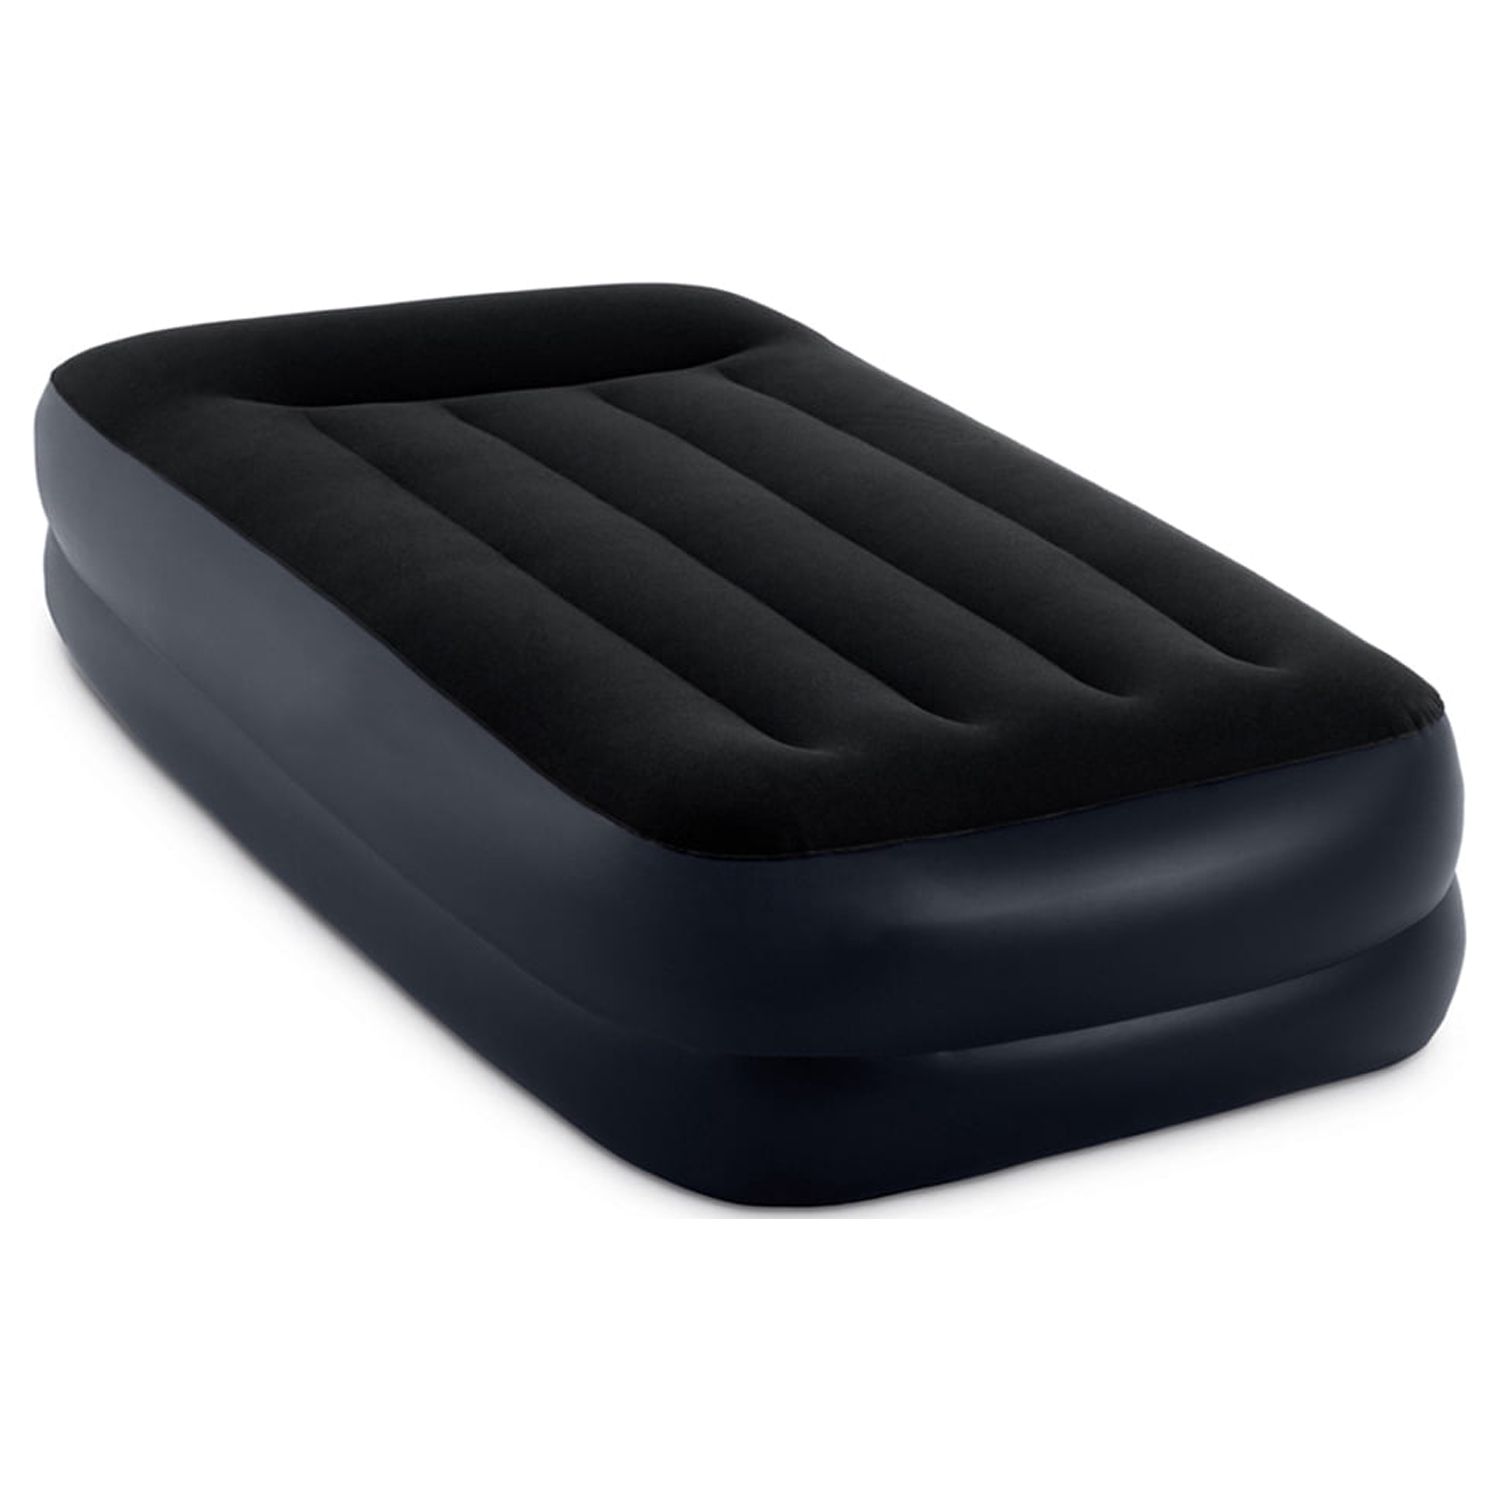 Intex Twin Rest Raised Air Mattress with Built In Pillow and Electric Pump, Gray - image 3 of 7